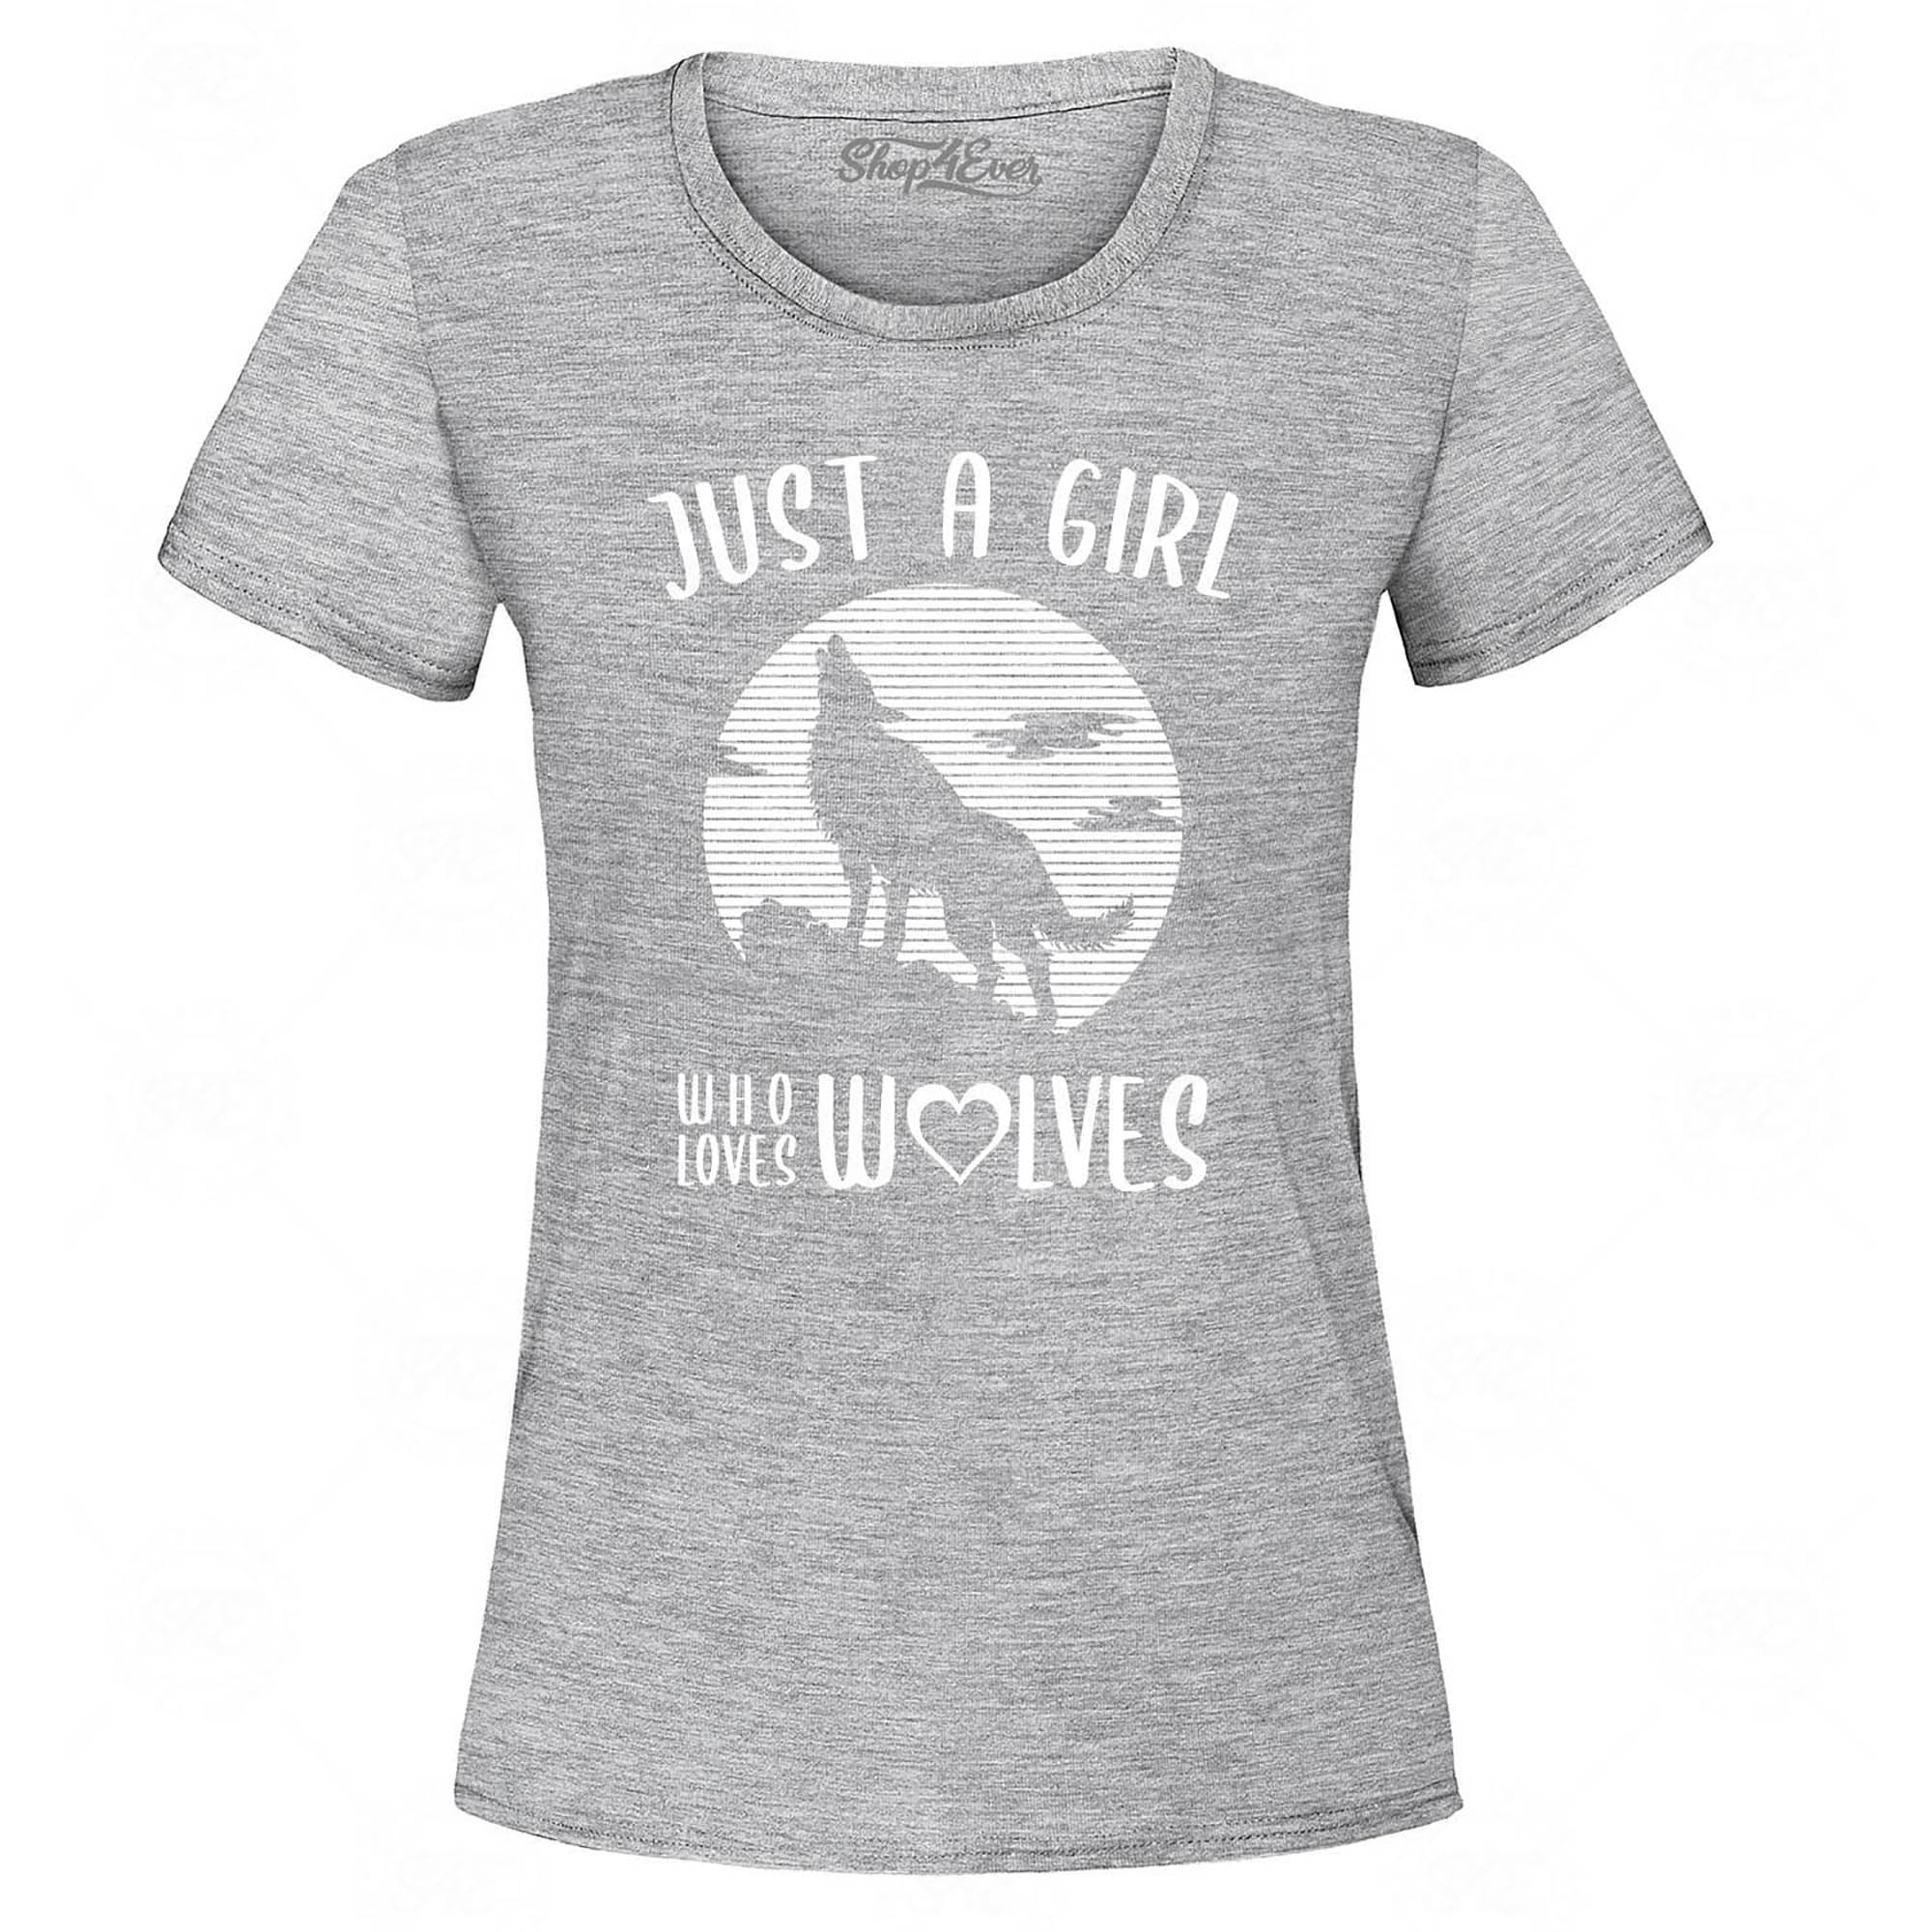 Just A Girl Who Loves Wolves Women's T-Shirt